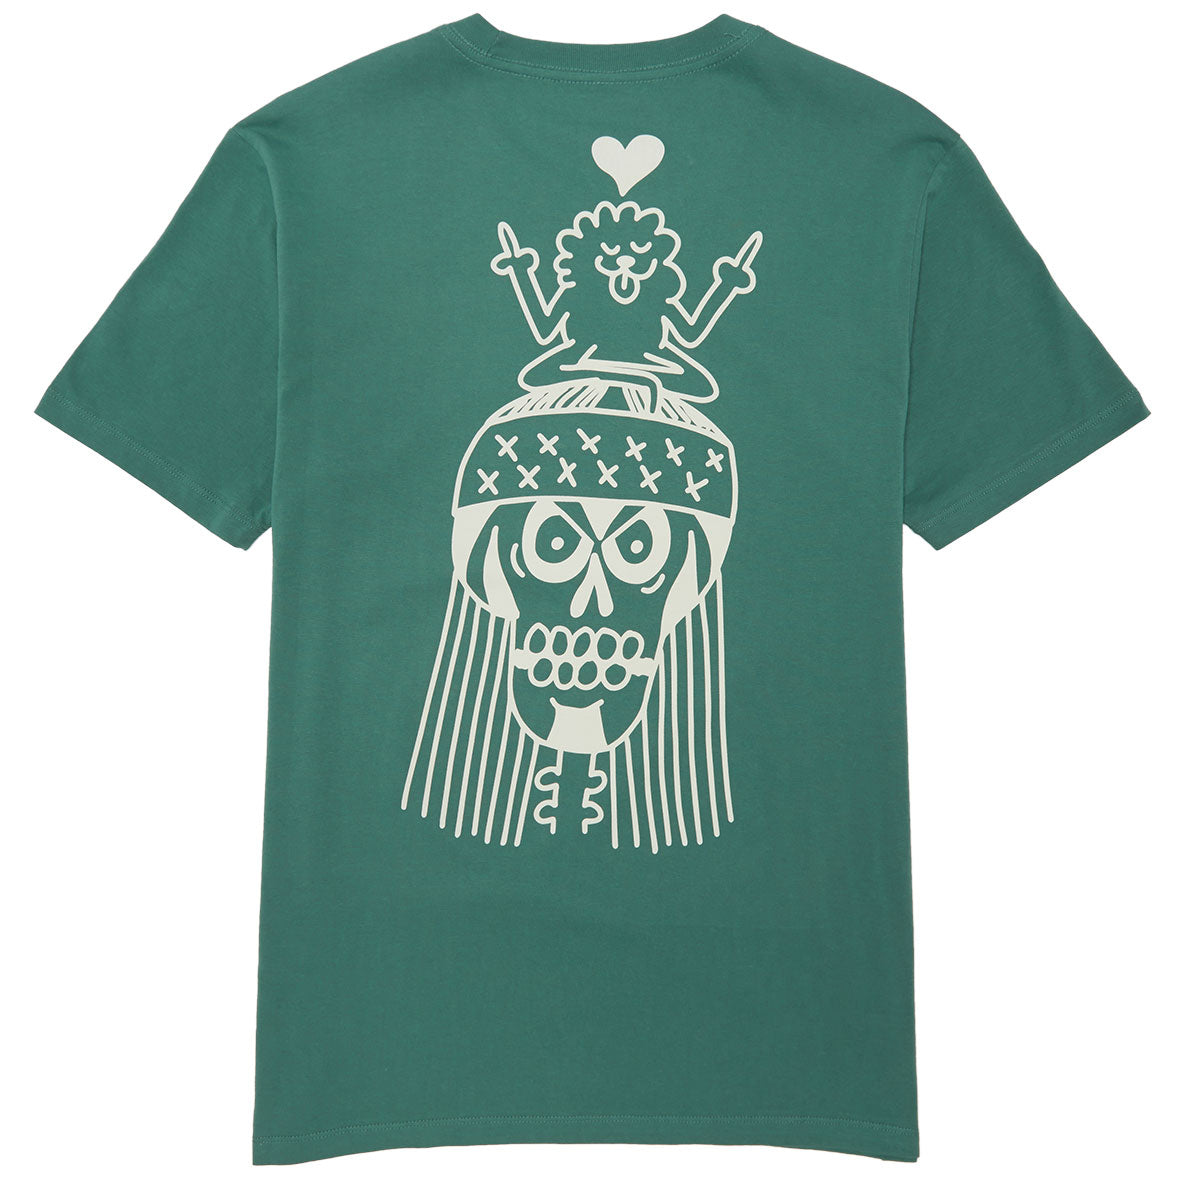 The Quiet Life x Jay Howell Doodle Organic Premium T-Shirt - Pine Green image 1